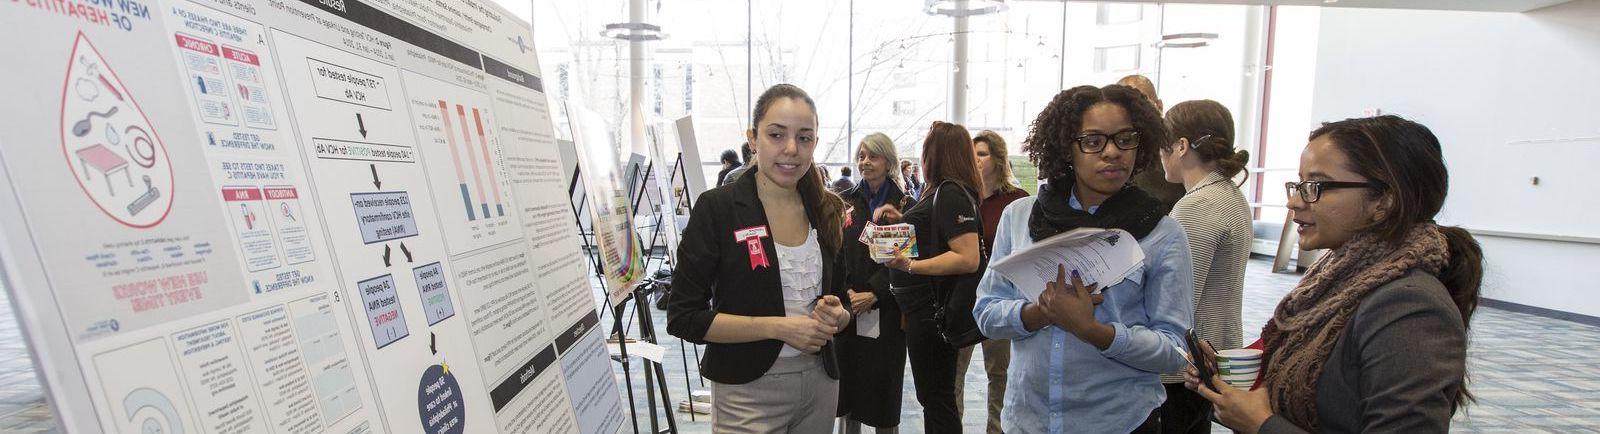 College of Public Health students share research findings with the public.